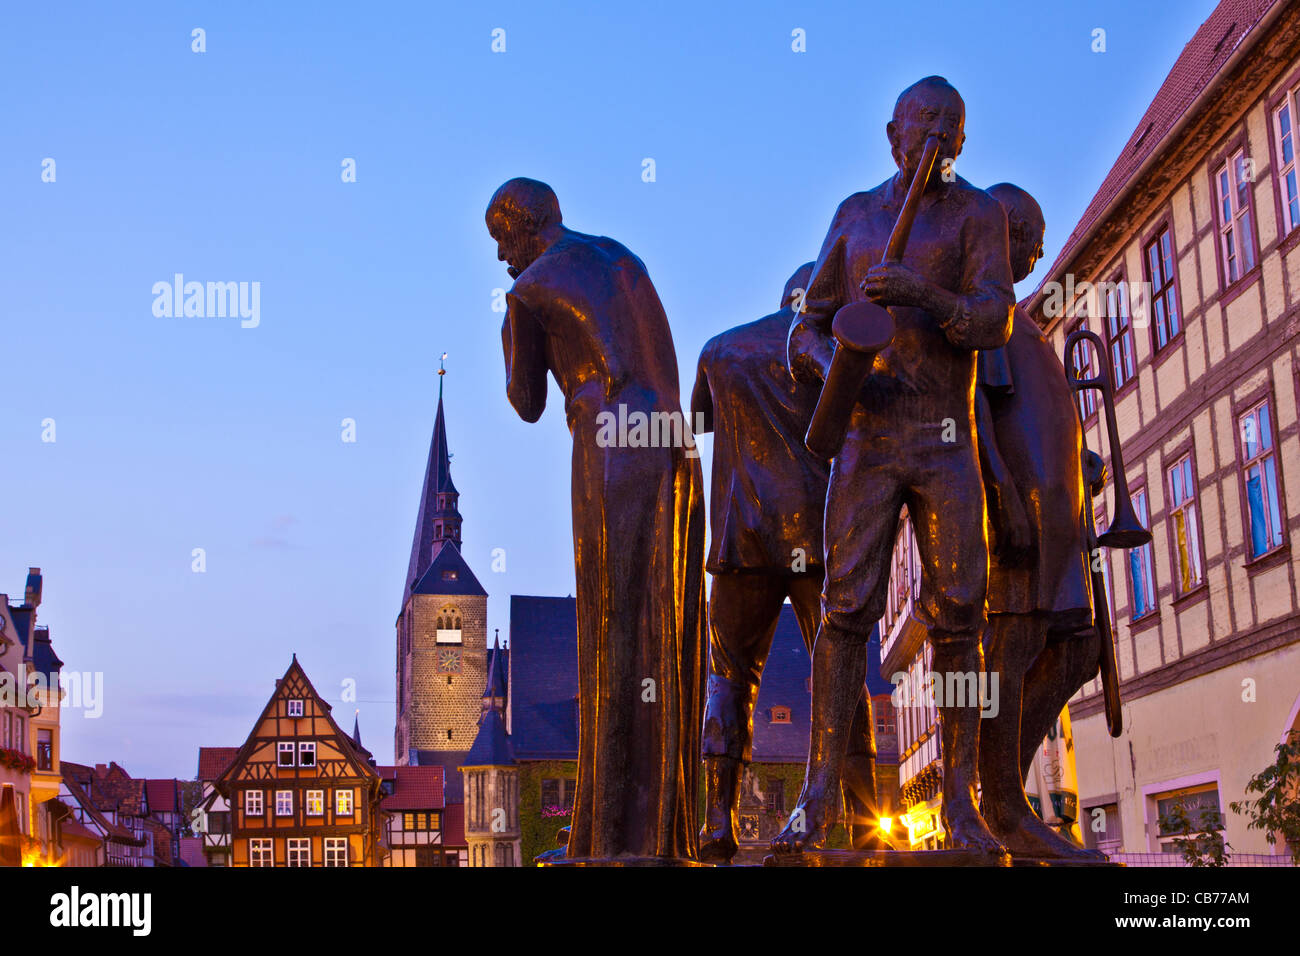 Twilight in the main market place or square, the Markt, Quedlinburg, Germany. Statue of Muenzenberg Musicians in the foreground. Stock Photo